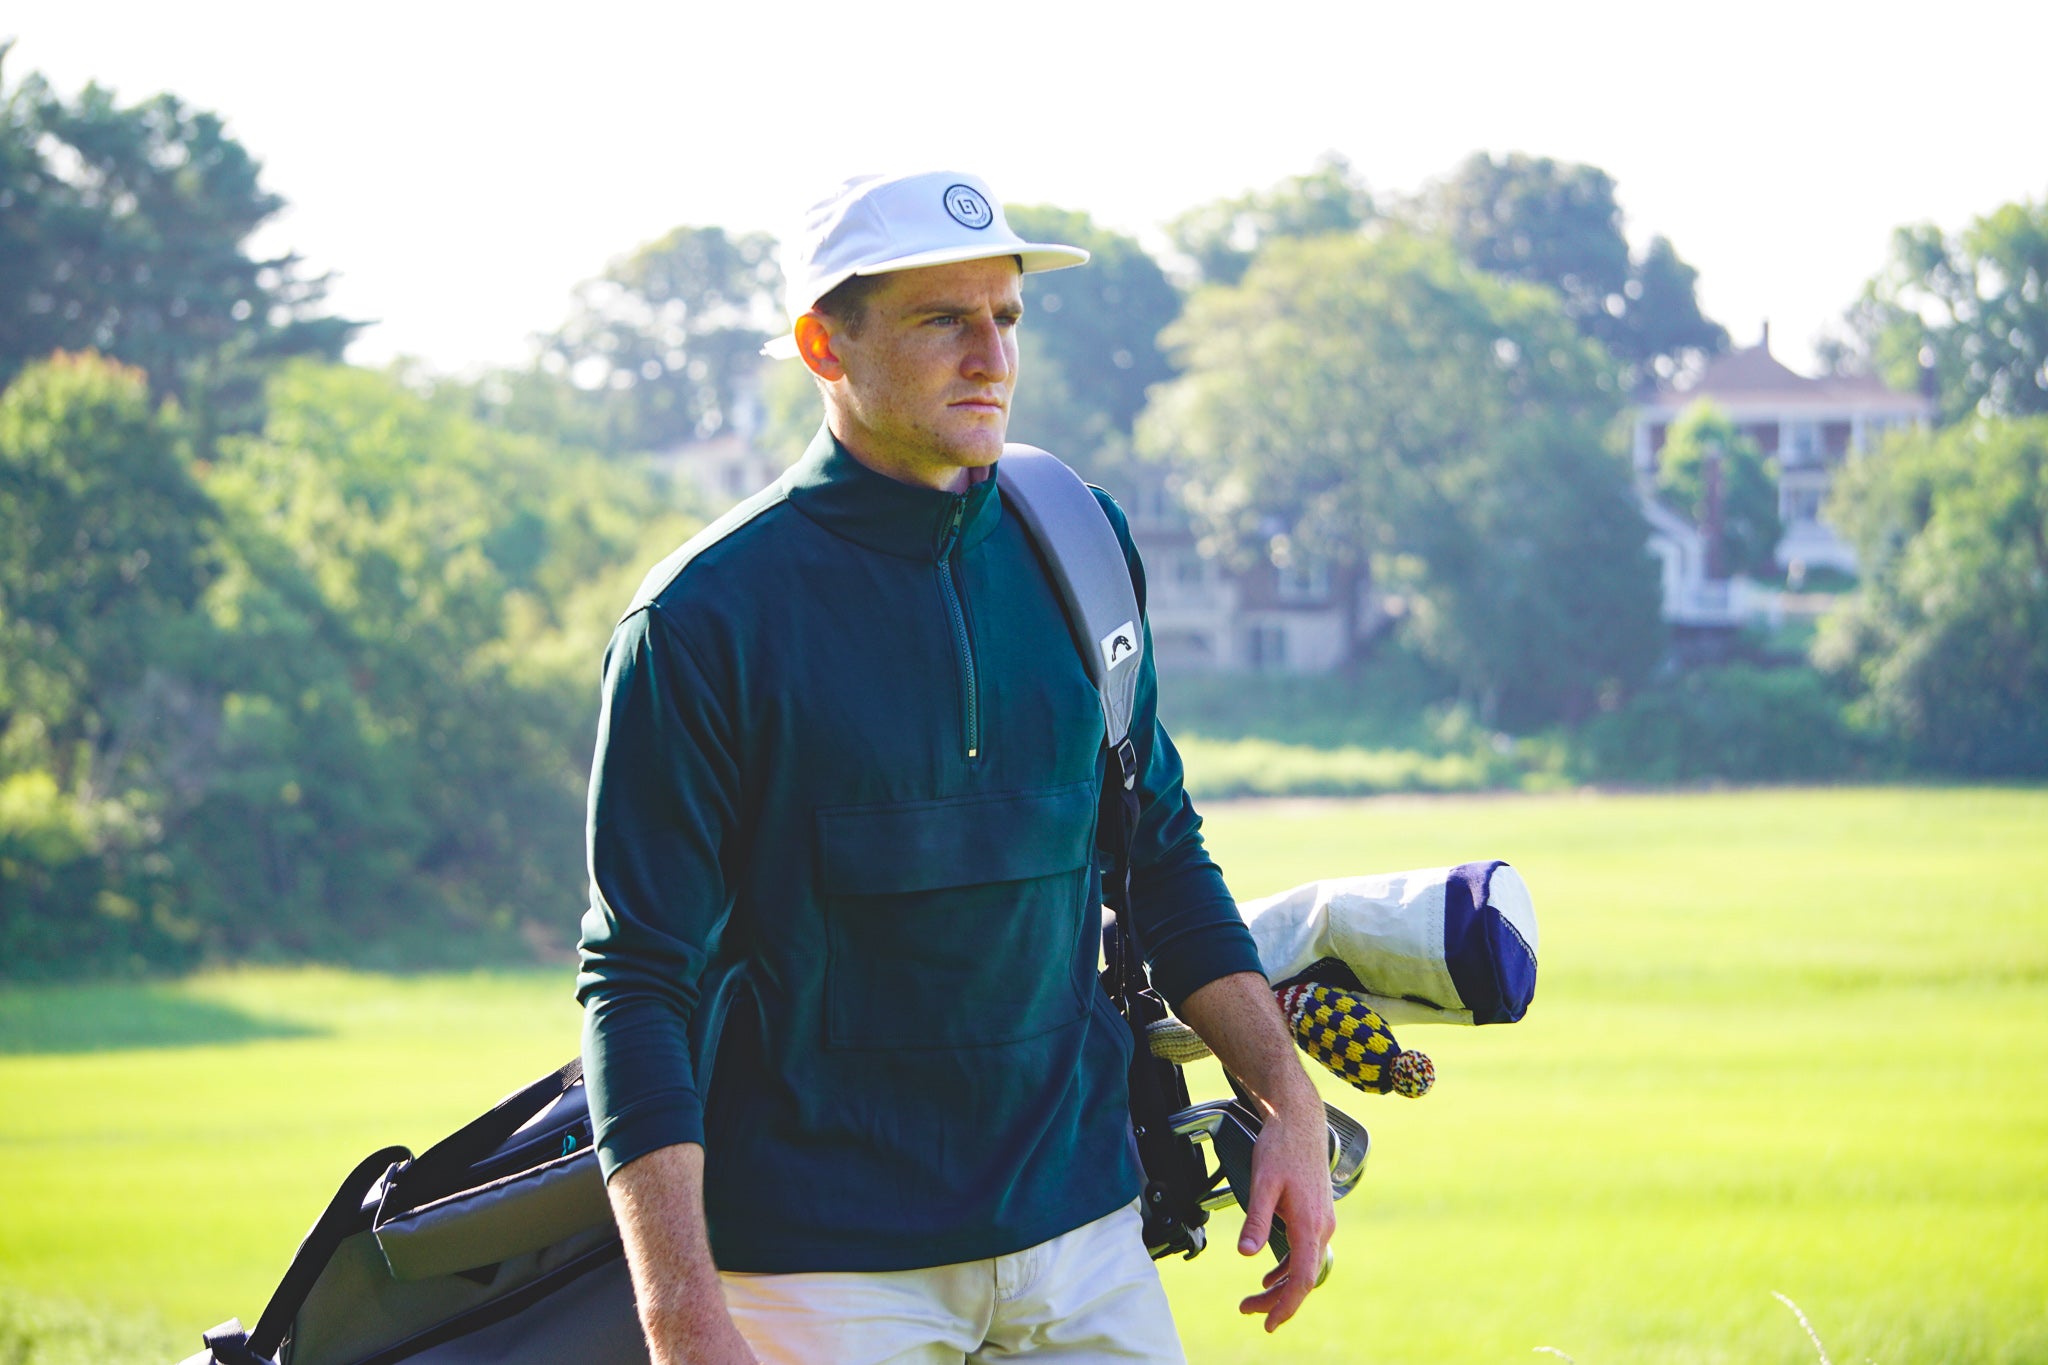 Men's Golf Outerwear - Golf Vests and Jackets – SOLO Golf Co.